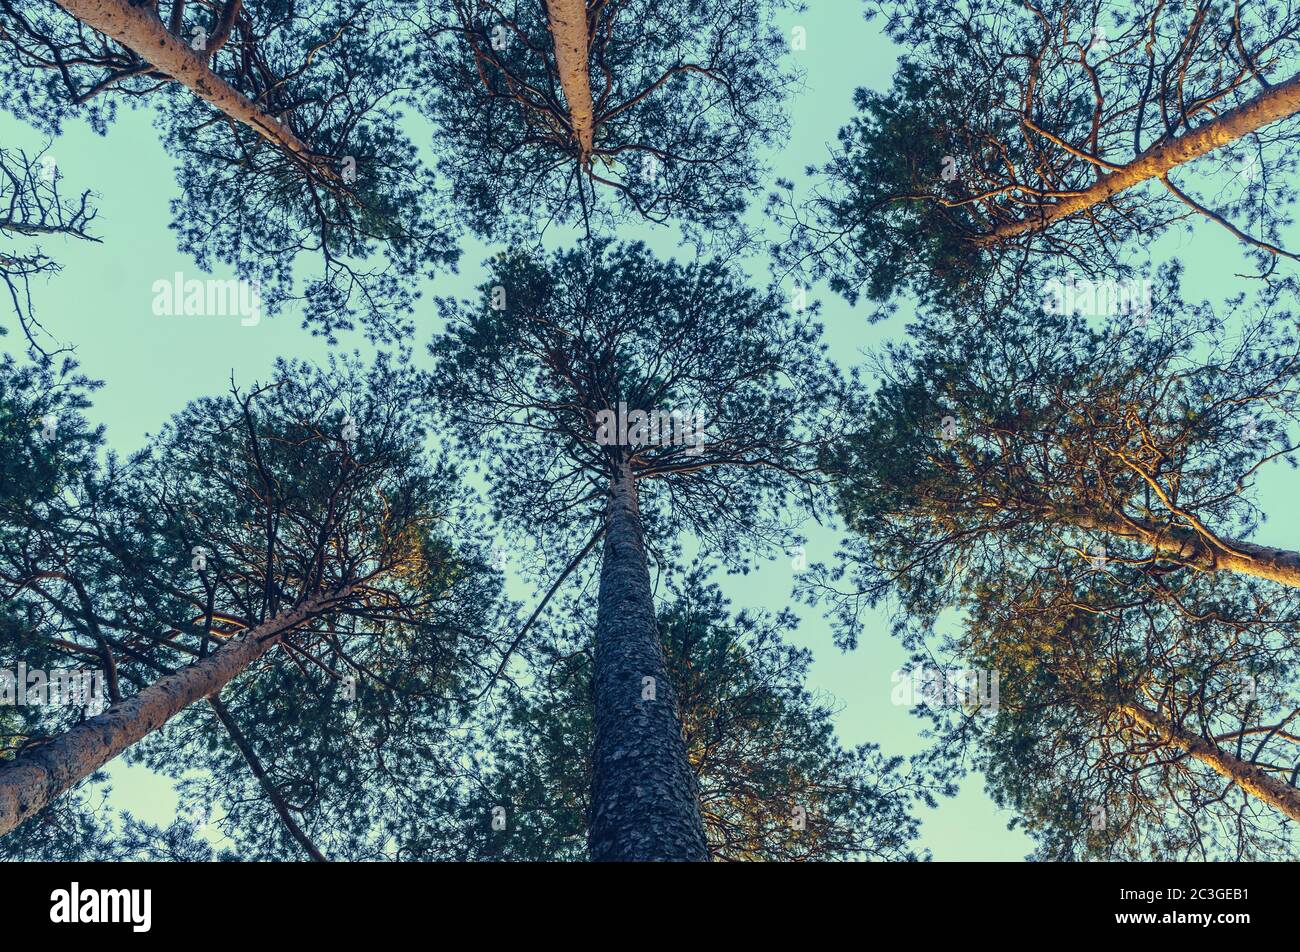 Bottom view of tall pine trees at sunset with clear blue sky Stock Photo